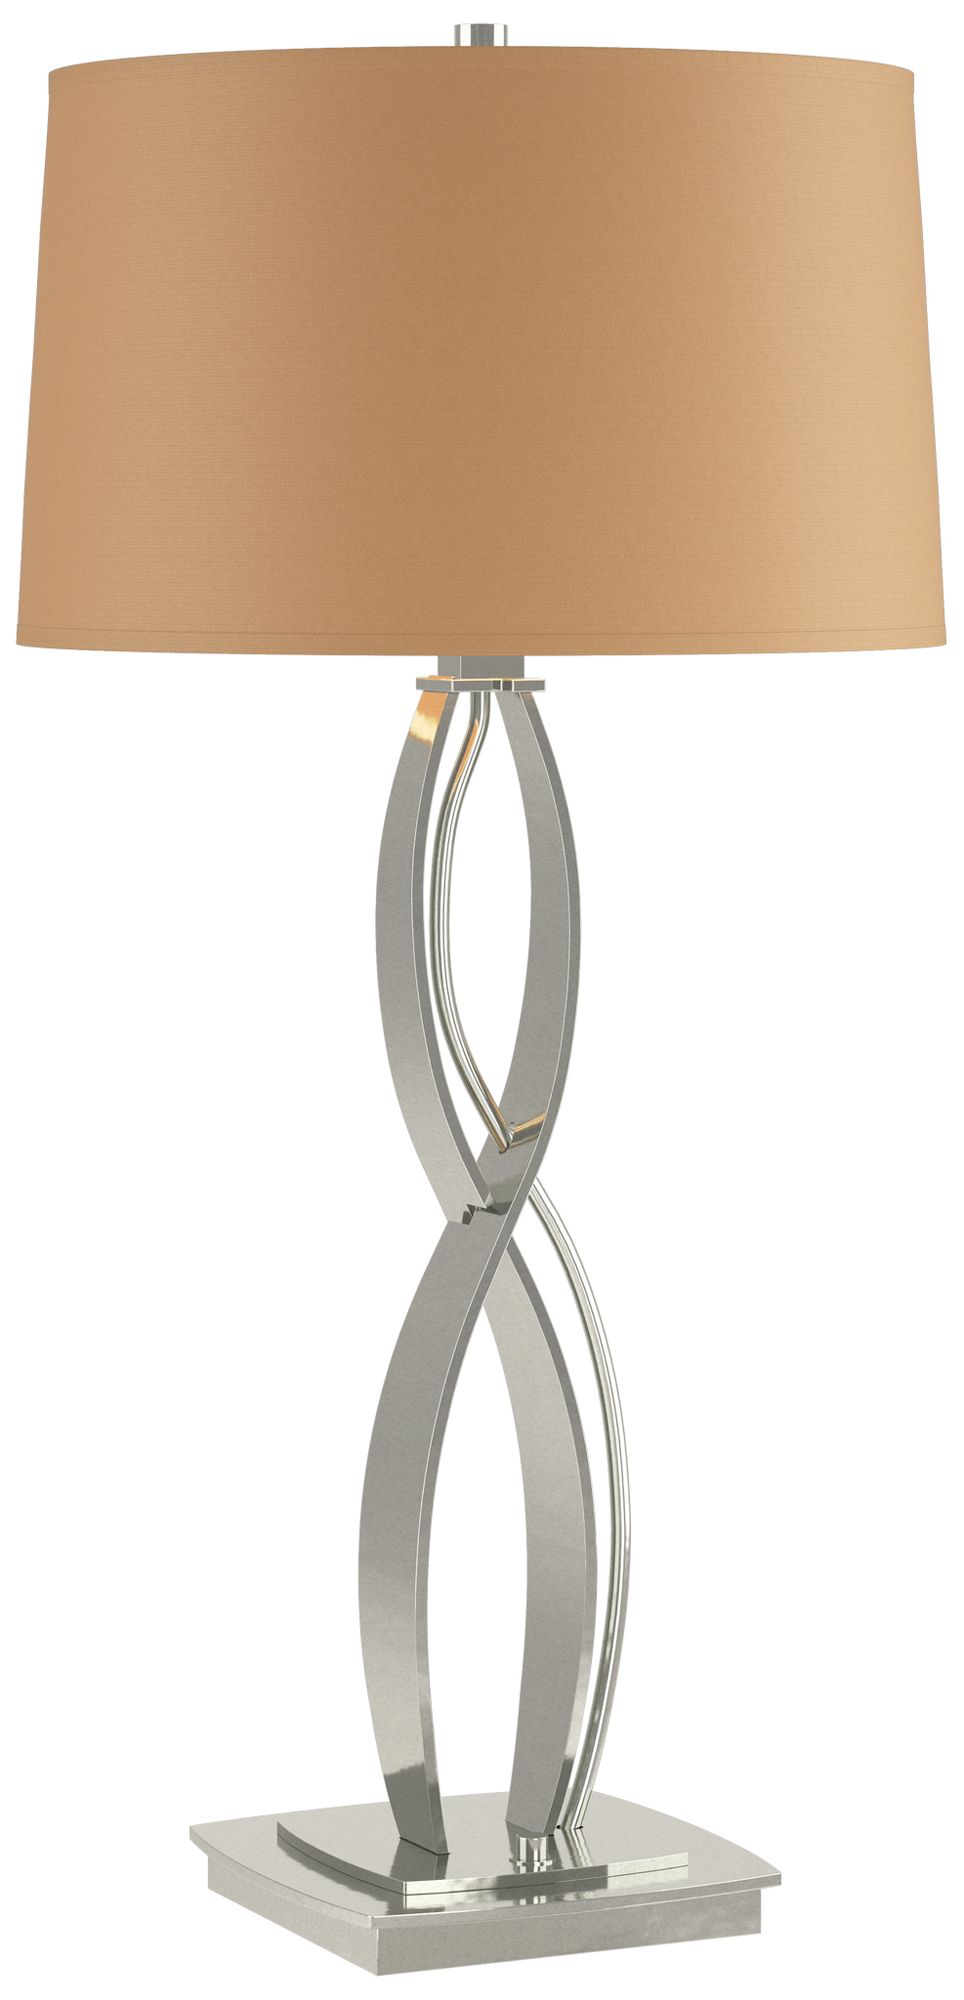 Almost Infinity 31"H Tall Sterling Table Lamp w/ Doeskin Suede Shade